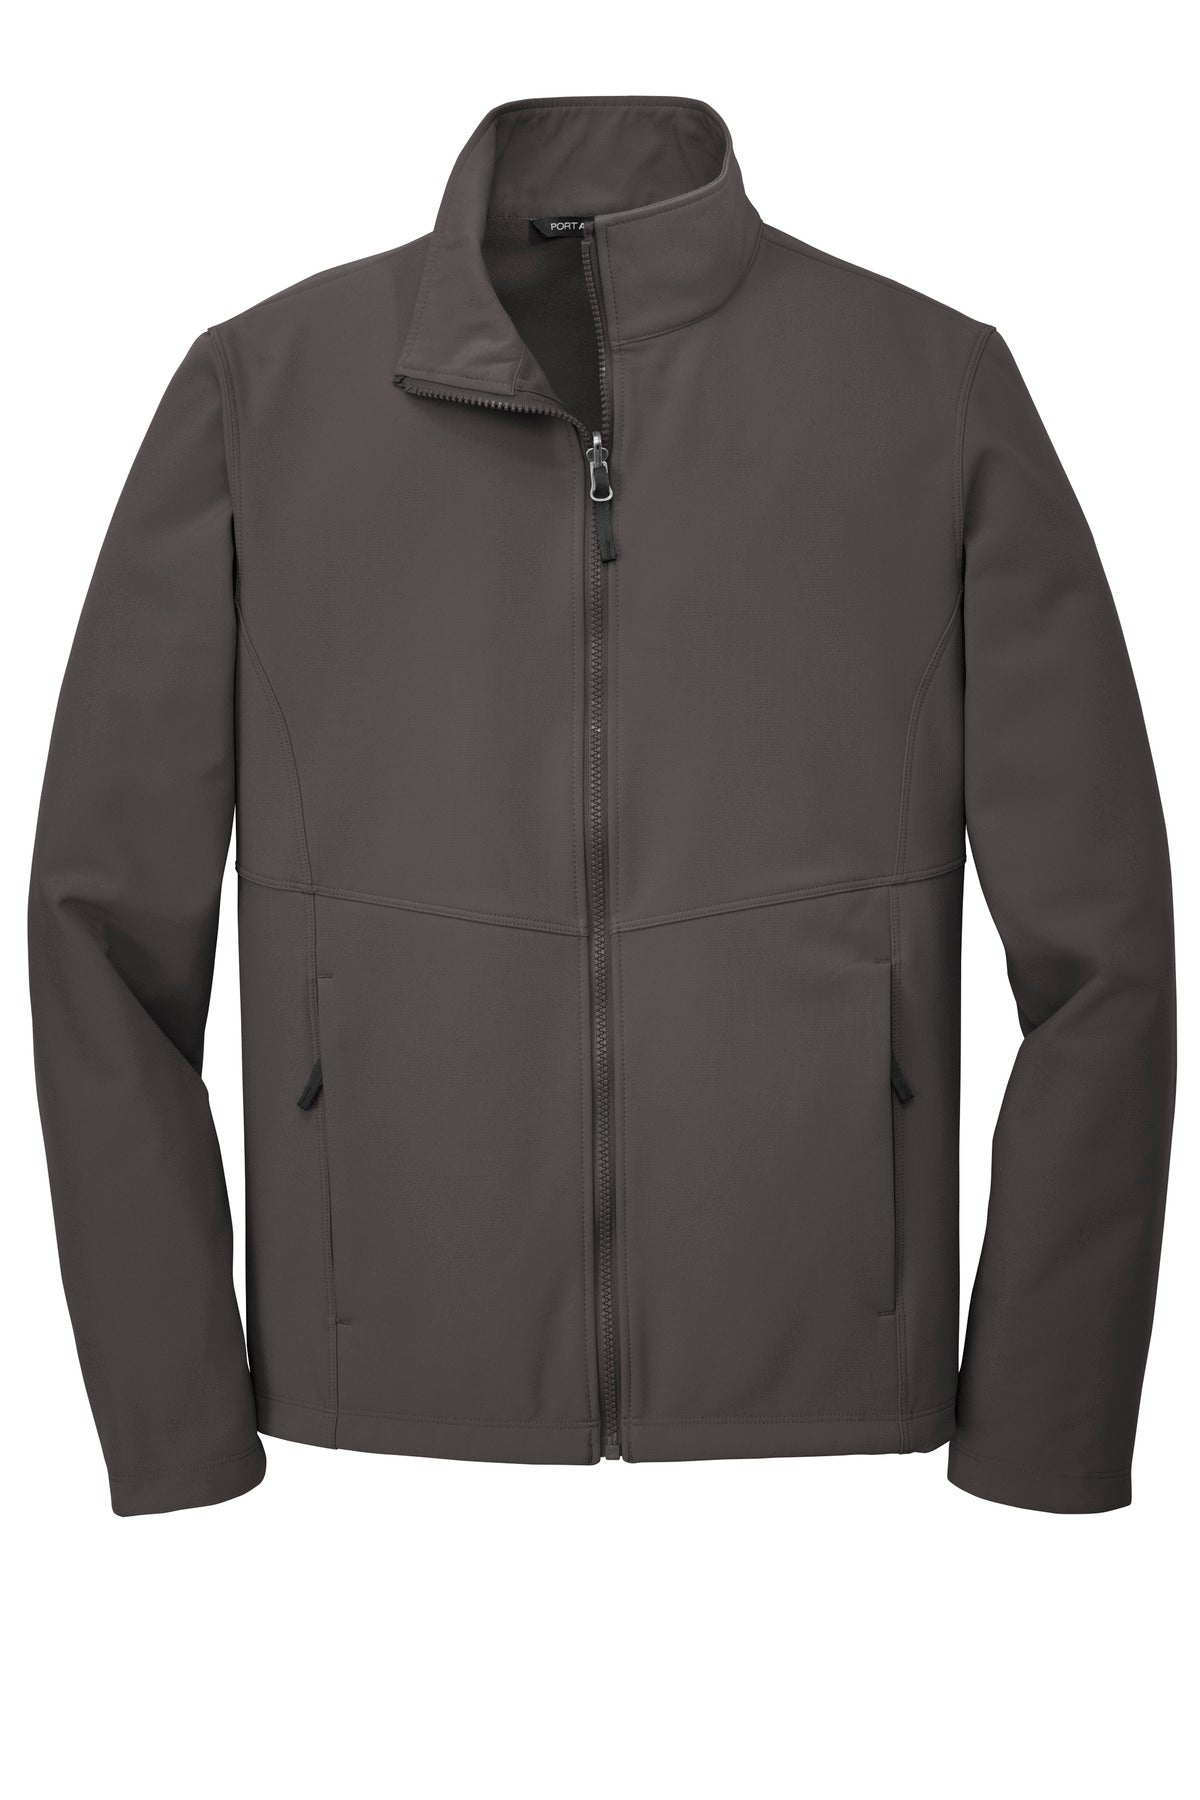 Port Authority Collective Soft Shell Jacket. J901